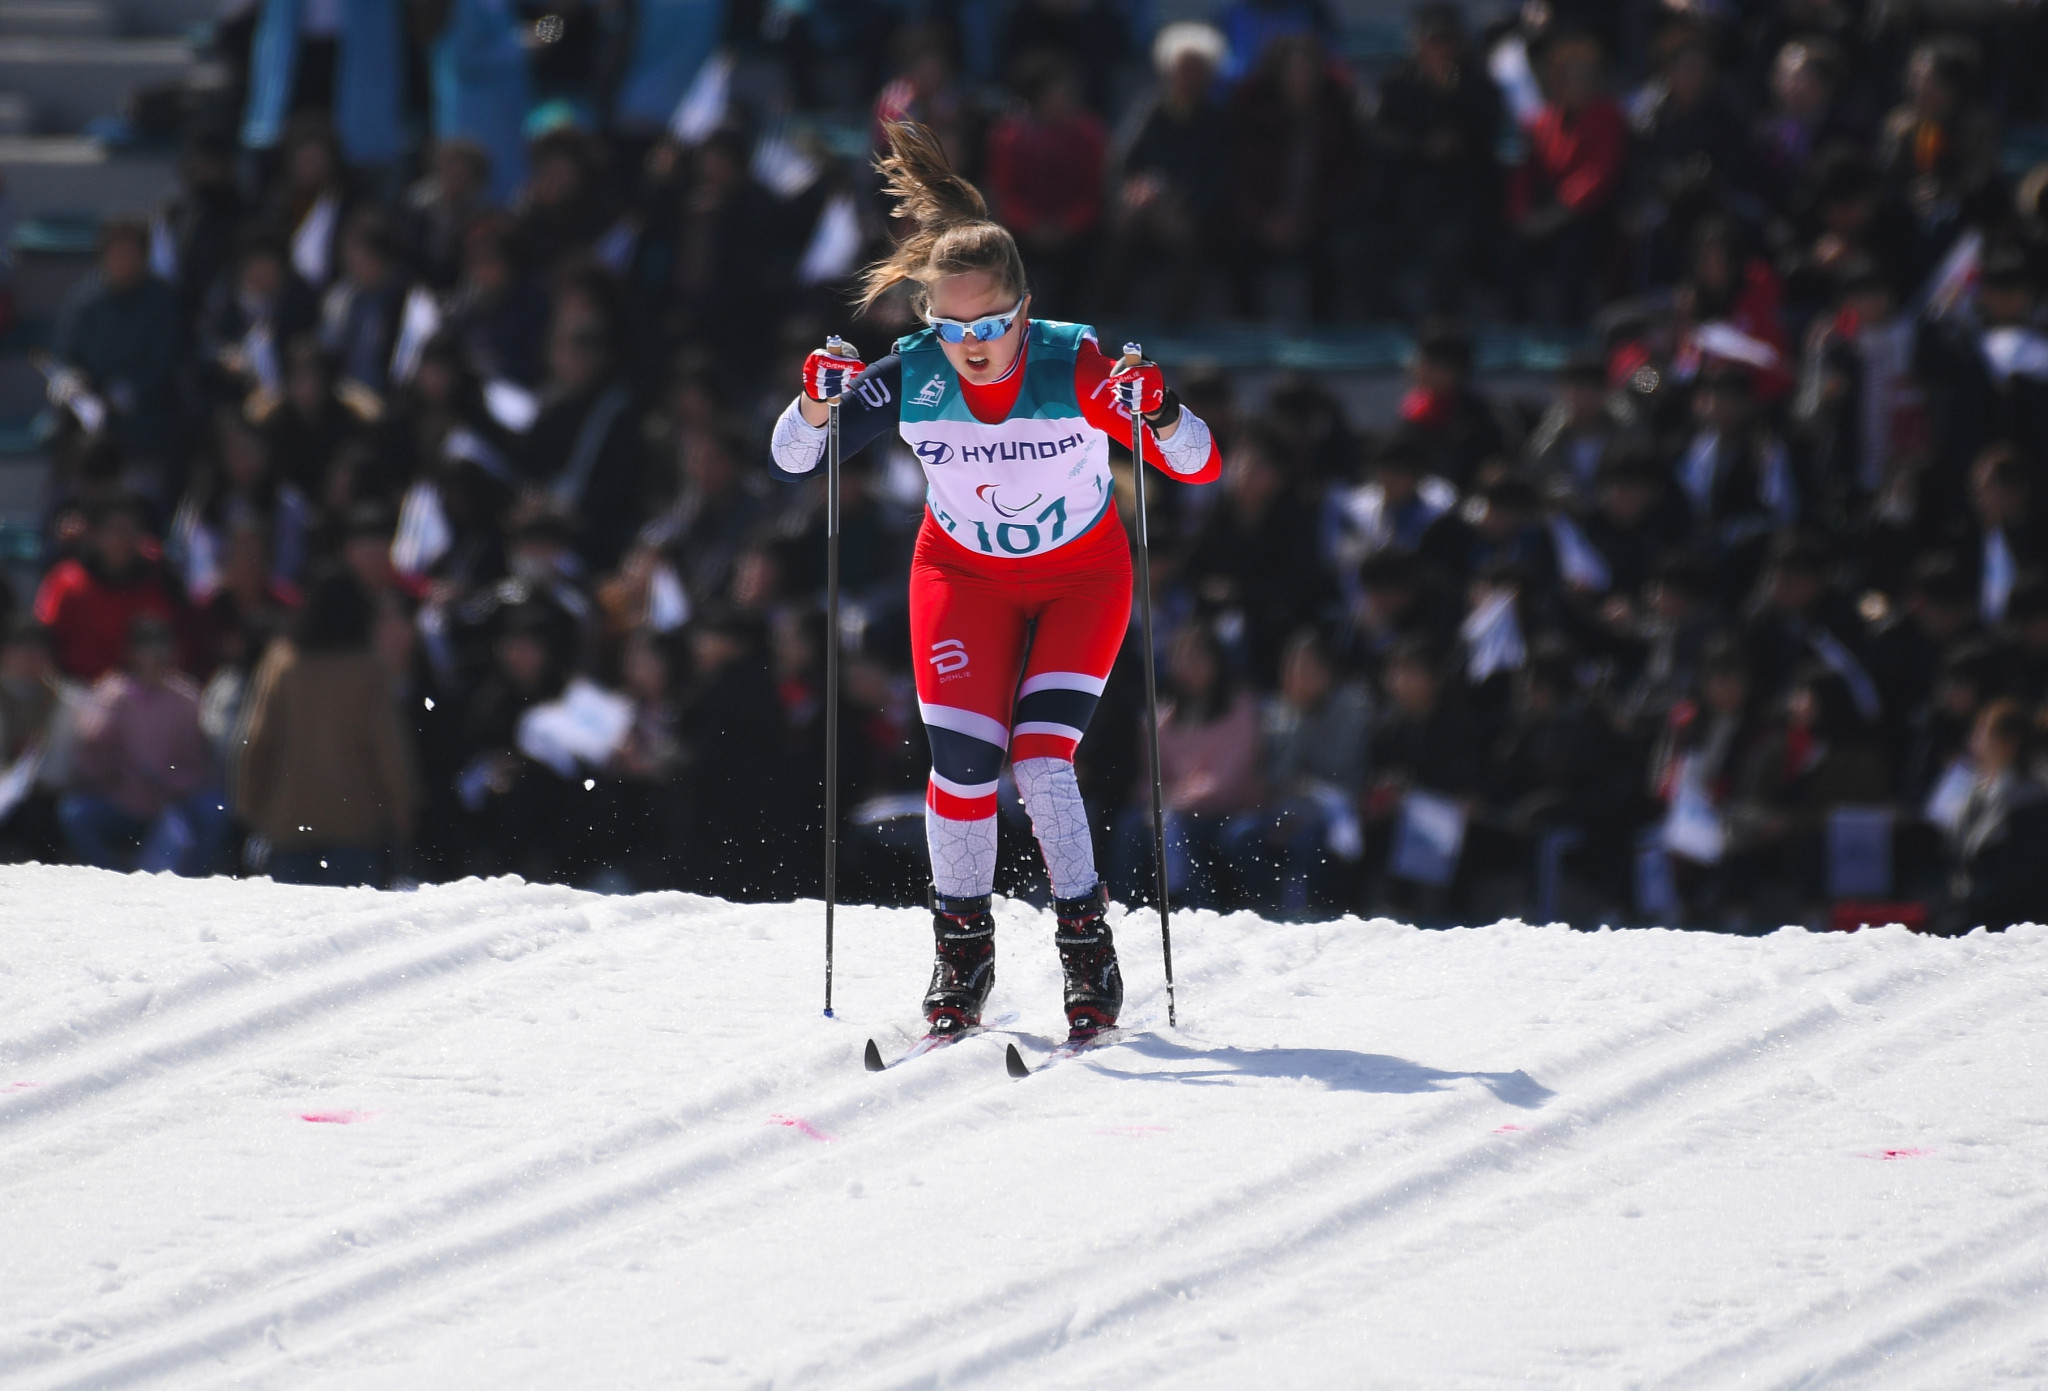 Norway's Vilde Nilsen will aim to continue her dominance in the women's standing events at the second Para Nordic Skiing World Cup event of the season in Östersund ©Getty Images